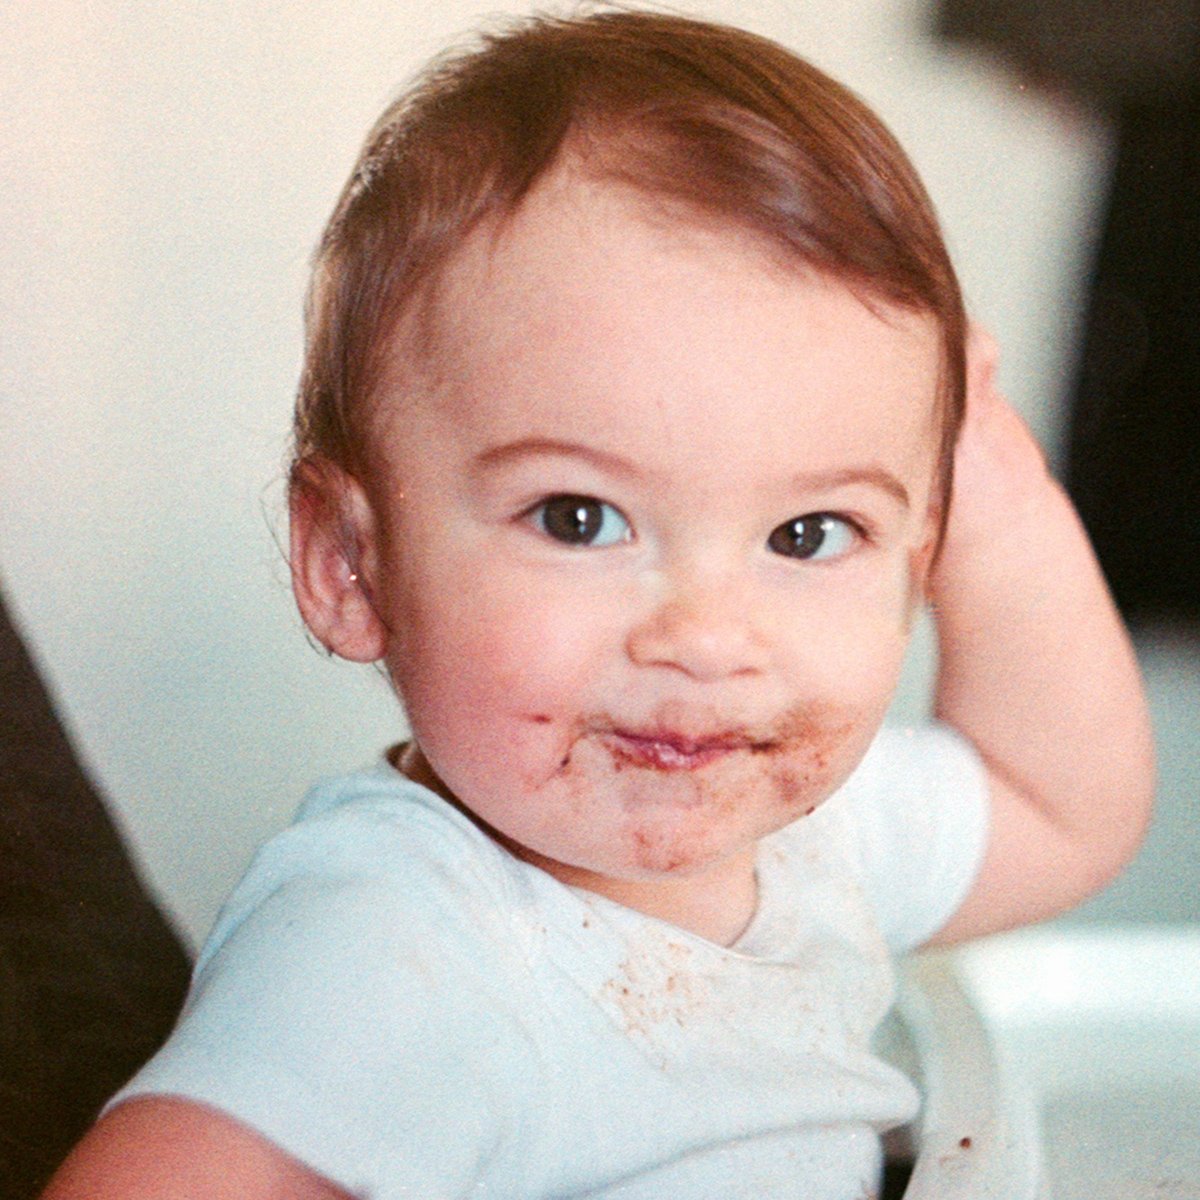 Is Your Baby Ready to Start Solids? Take the Quiz!